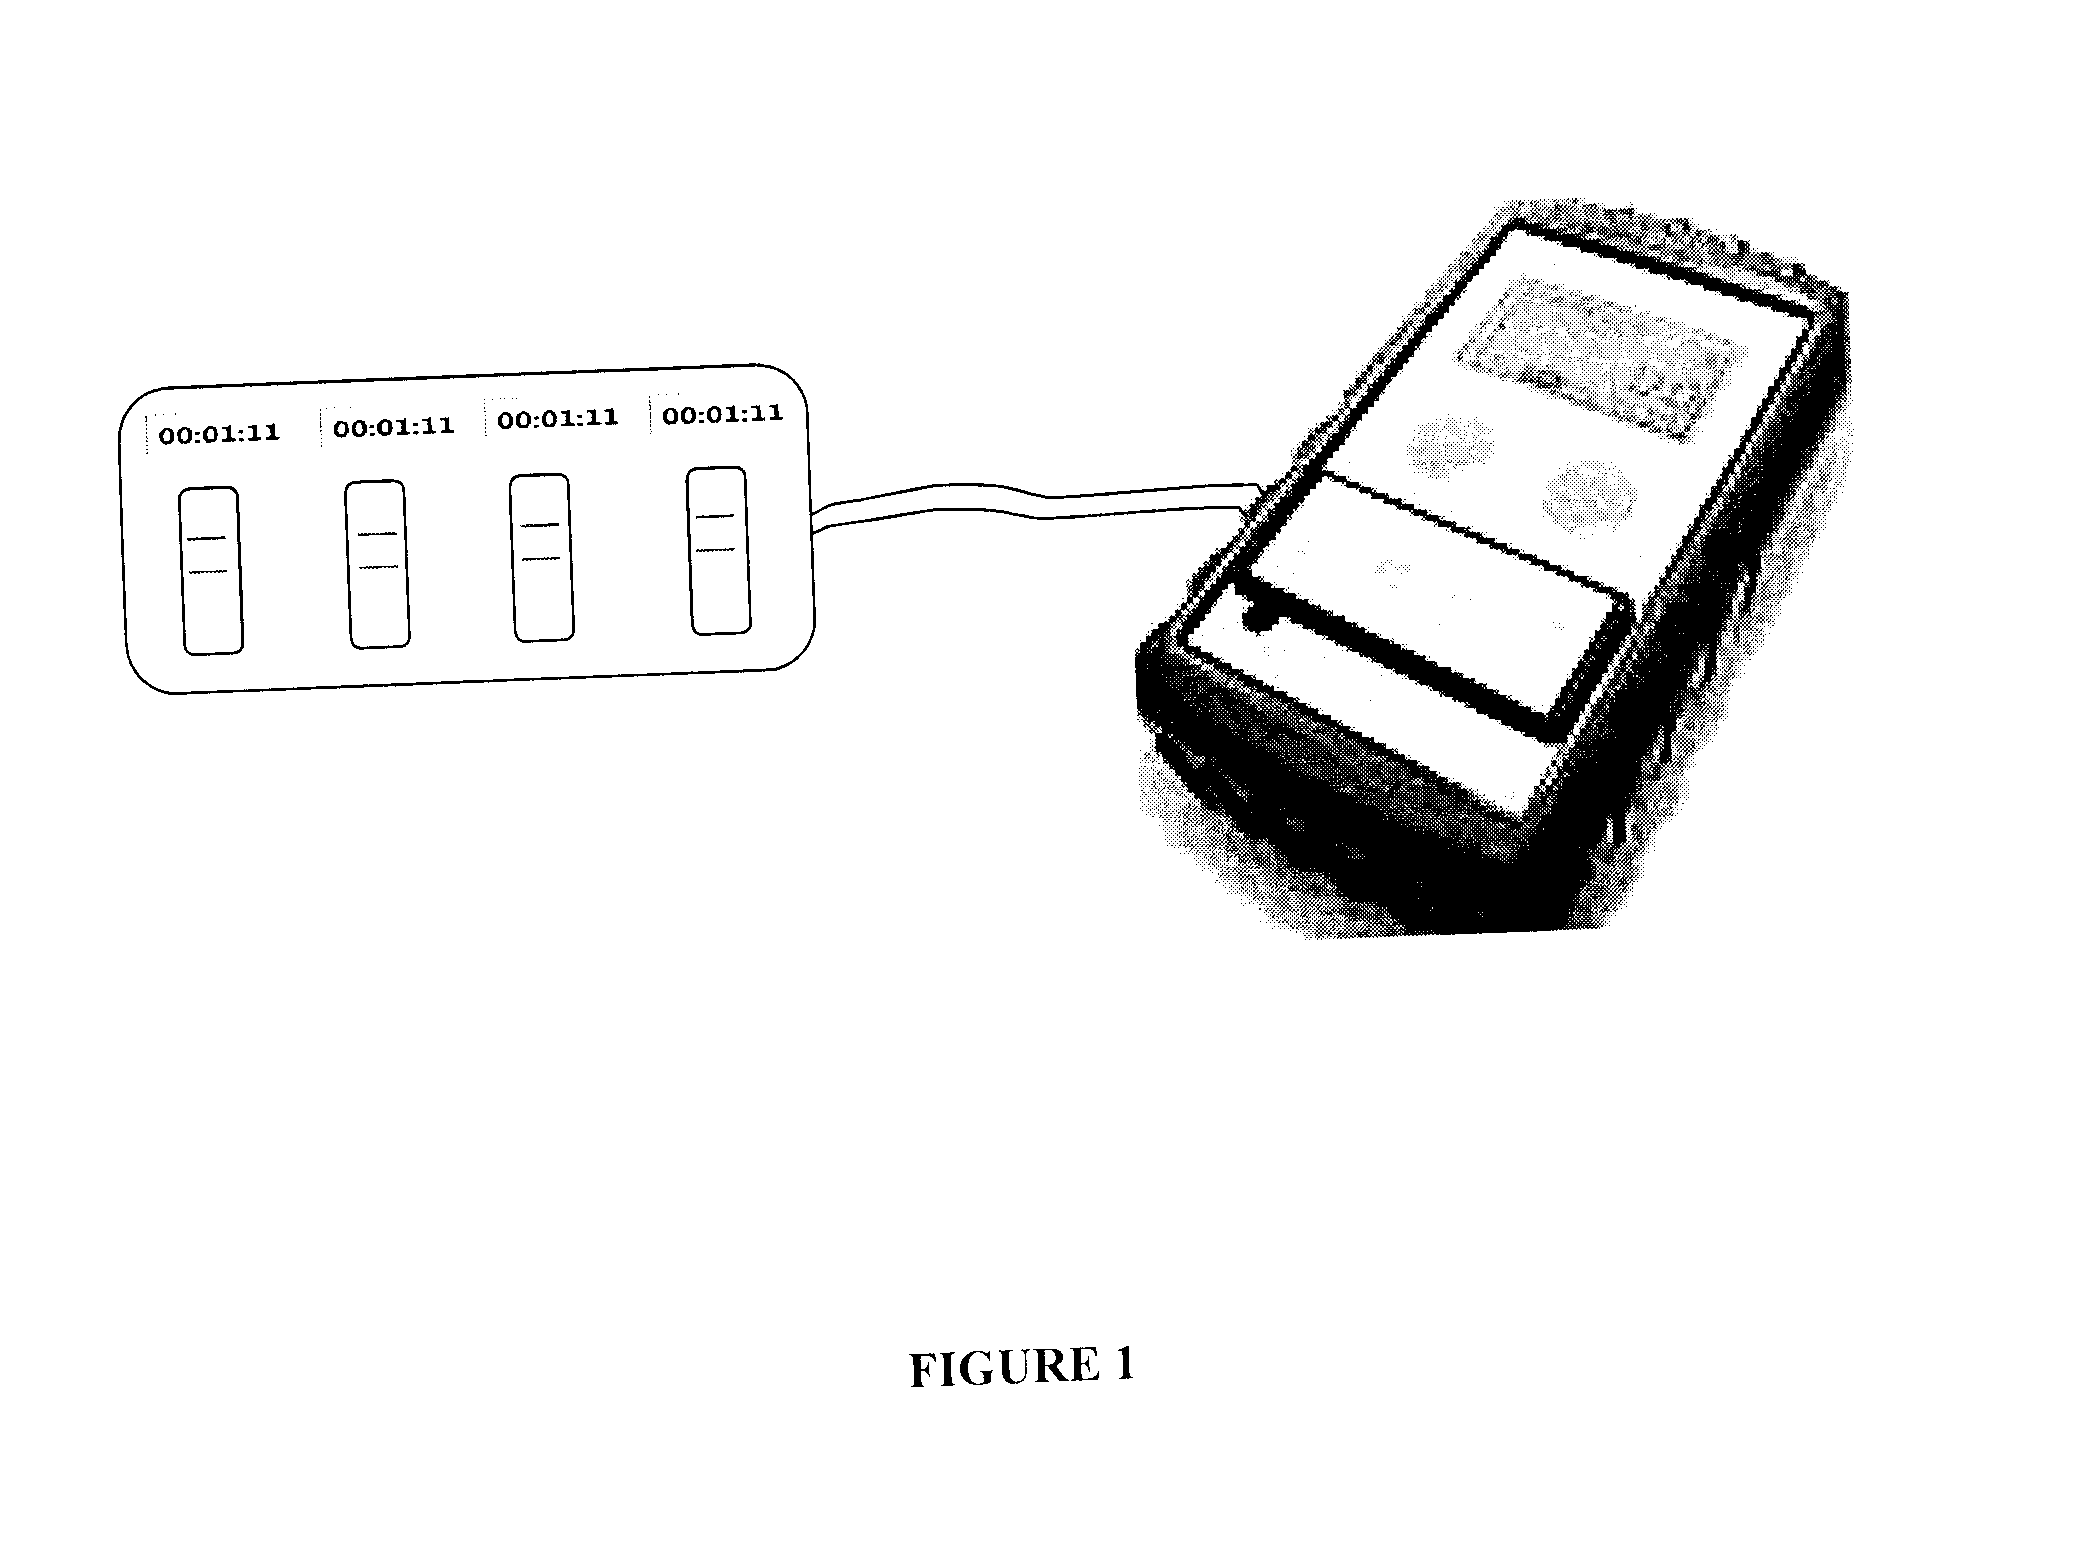 Quality control sensor method, system and device for use with biological/environmental rapid diagnostic test devices